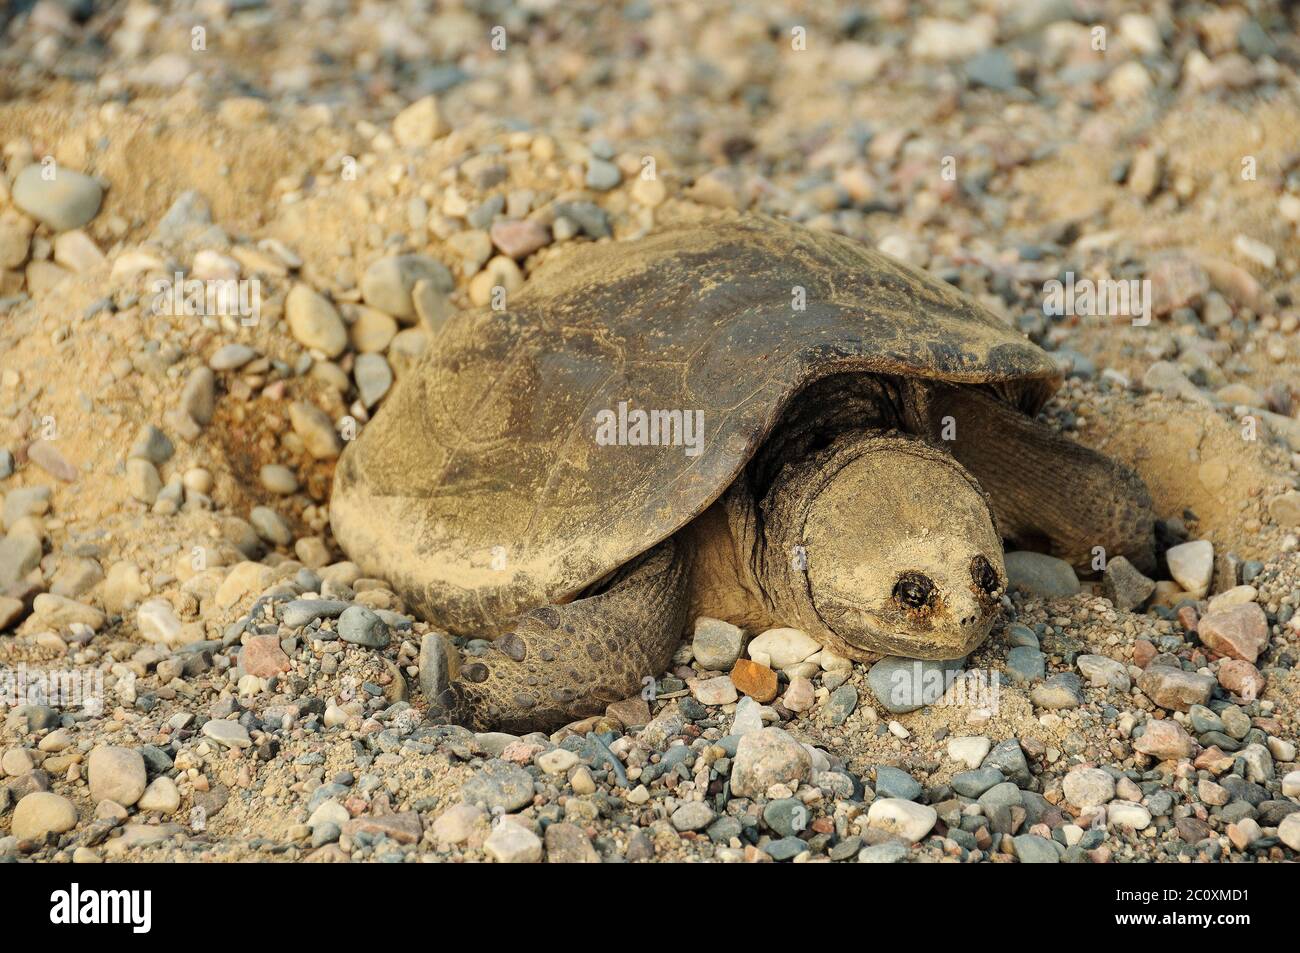 Snapping Turtle laying eggs in its environment and surrounding. Stock Photo